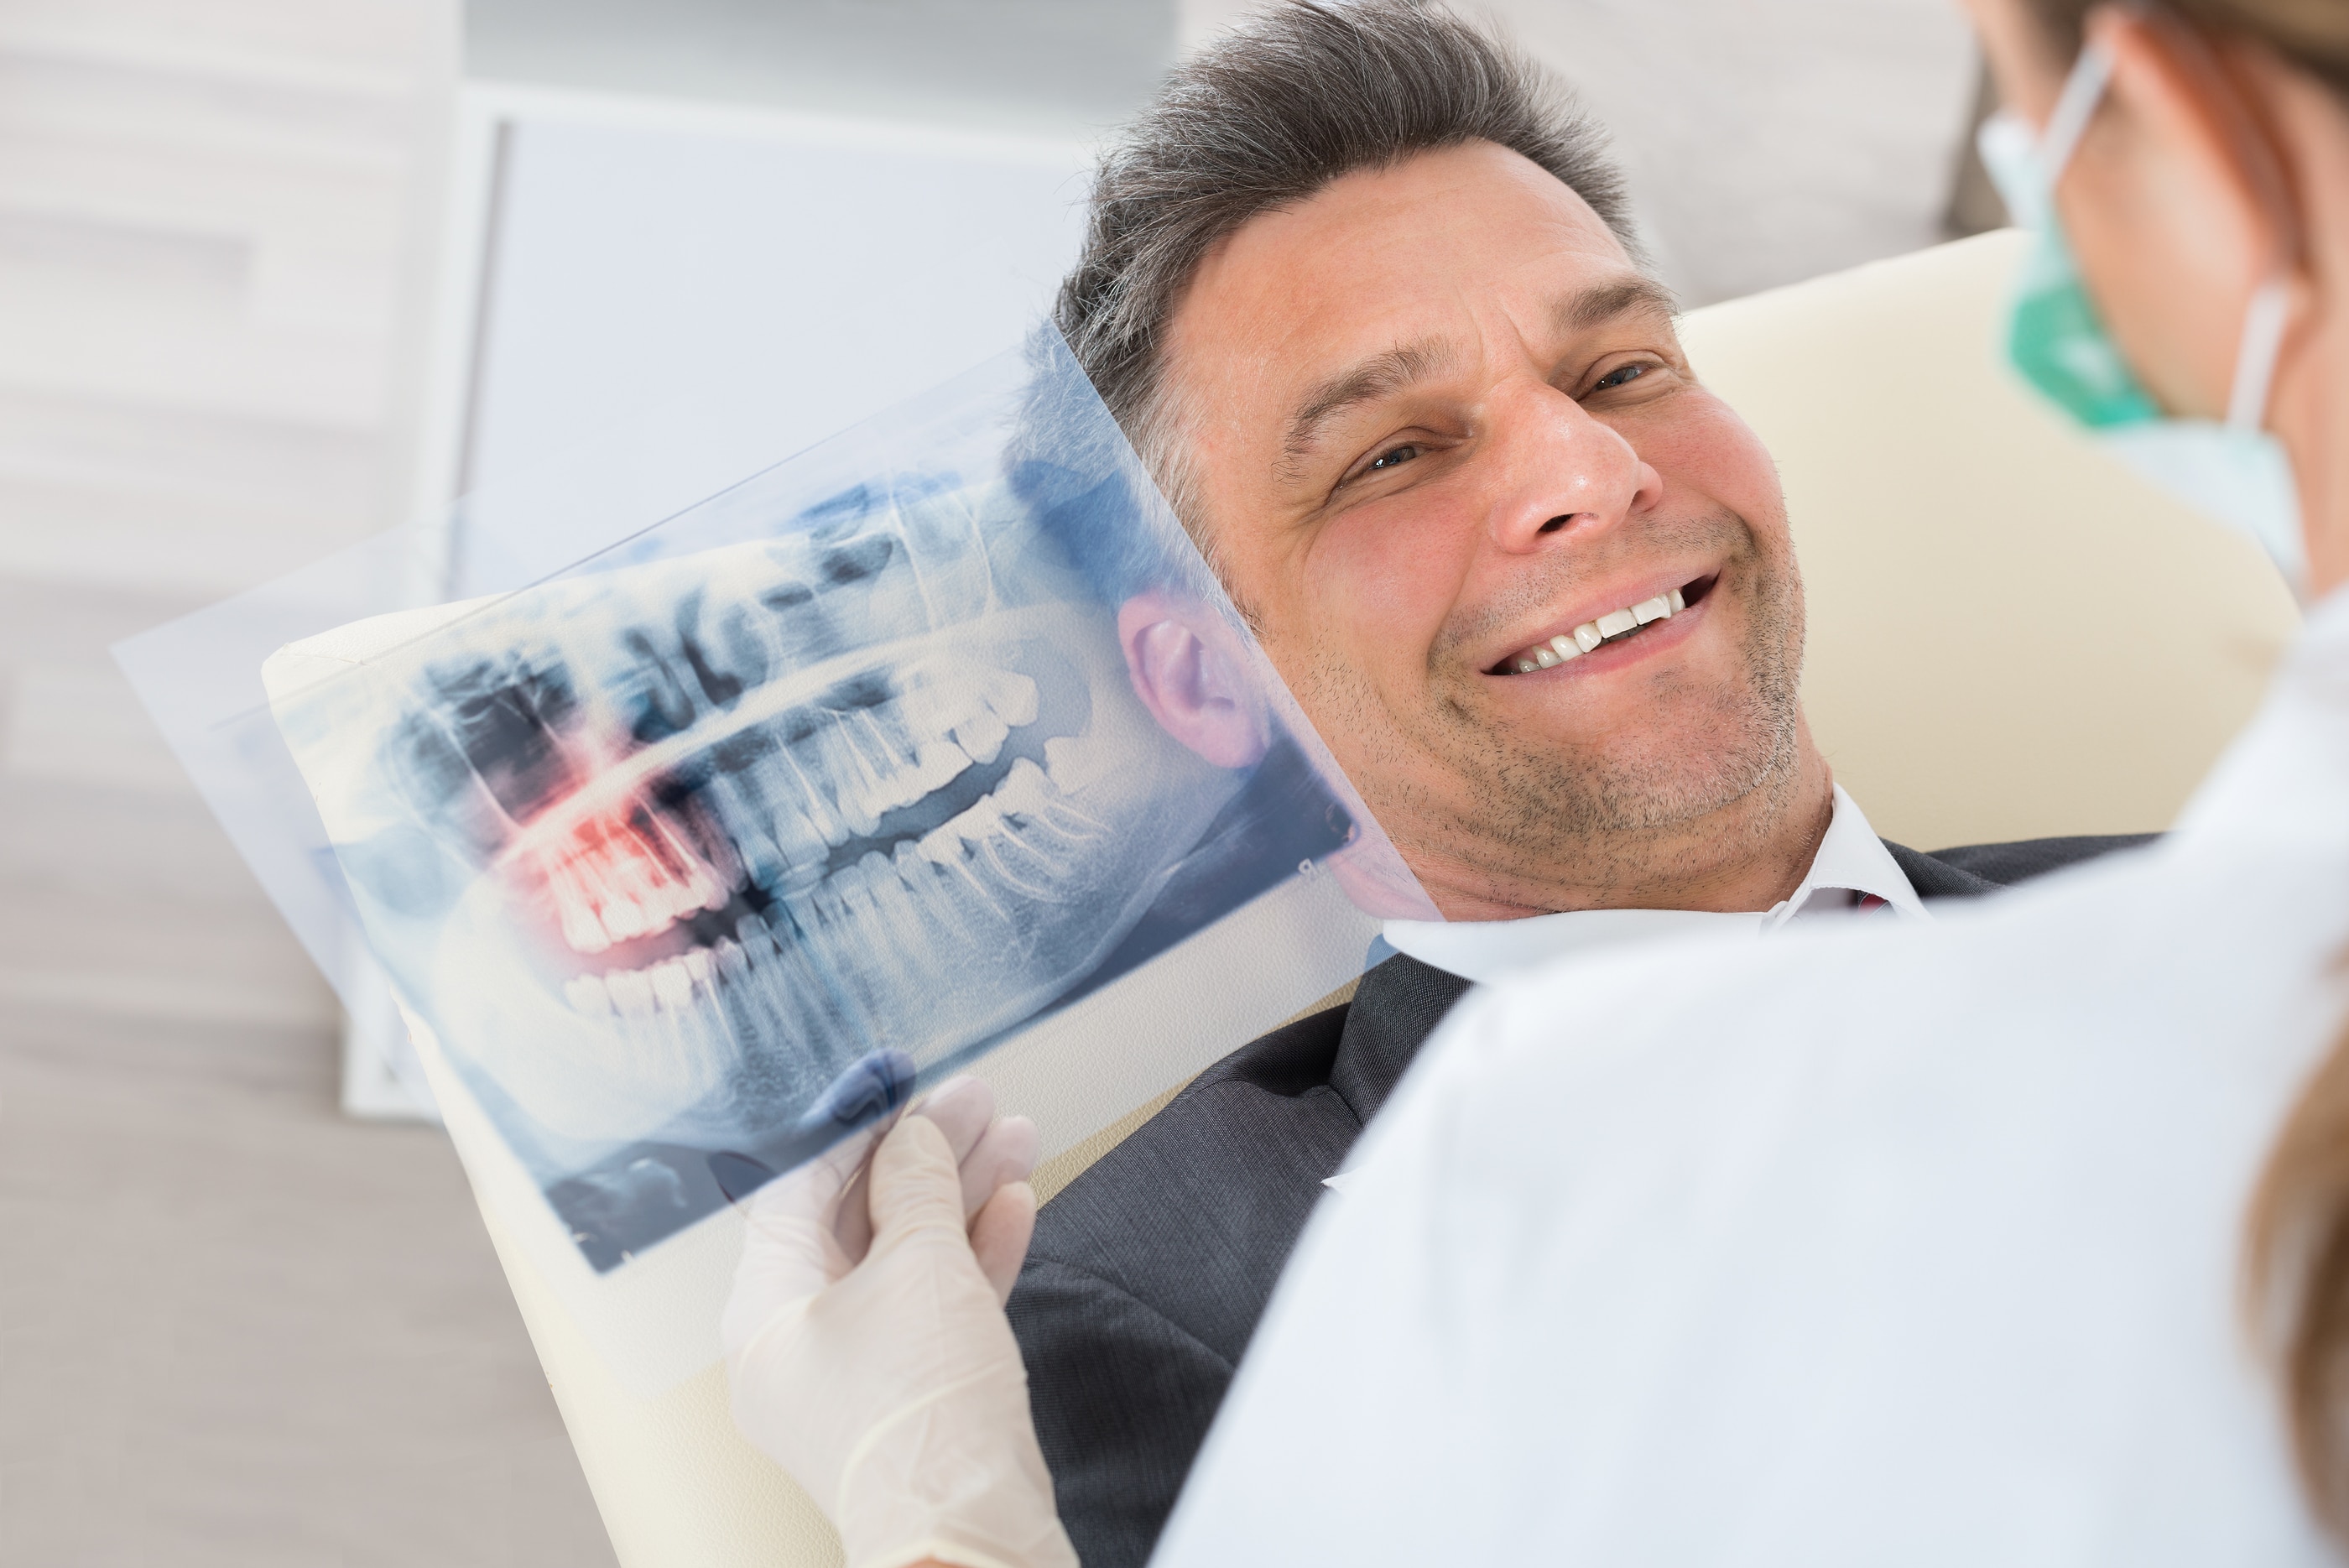 How do Dental Professionals keep their Teeth smiling? - Featured Image